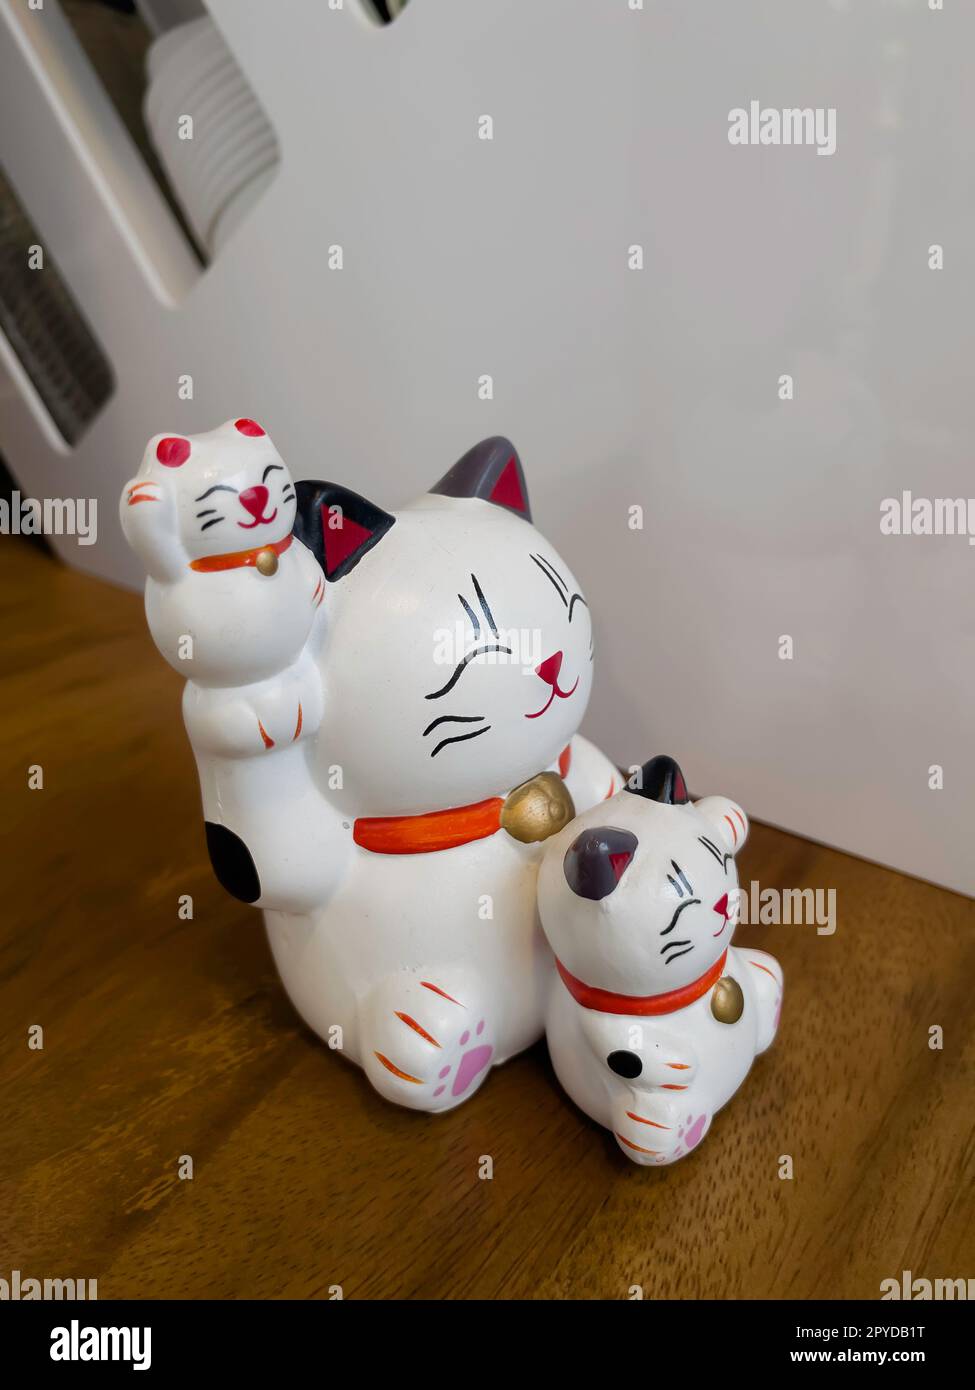 Lucky cat standing and holding Stock Photo